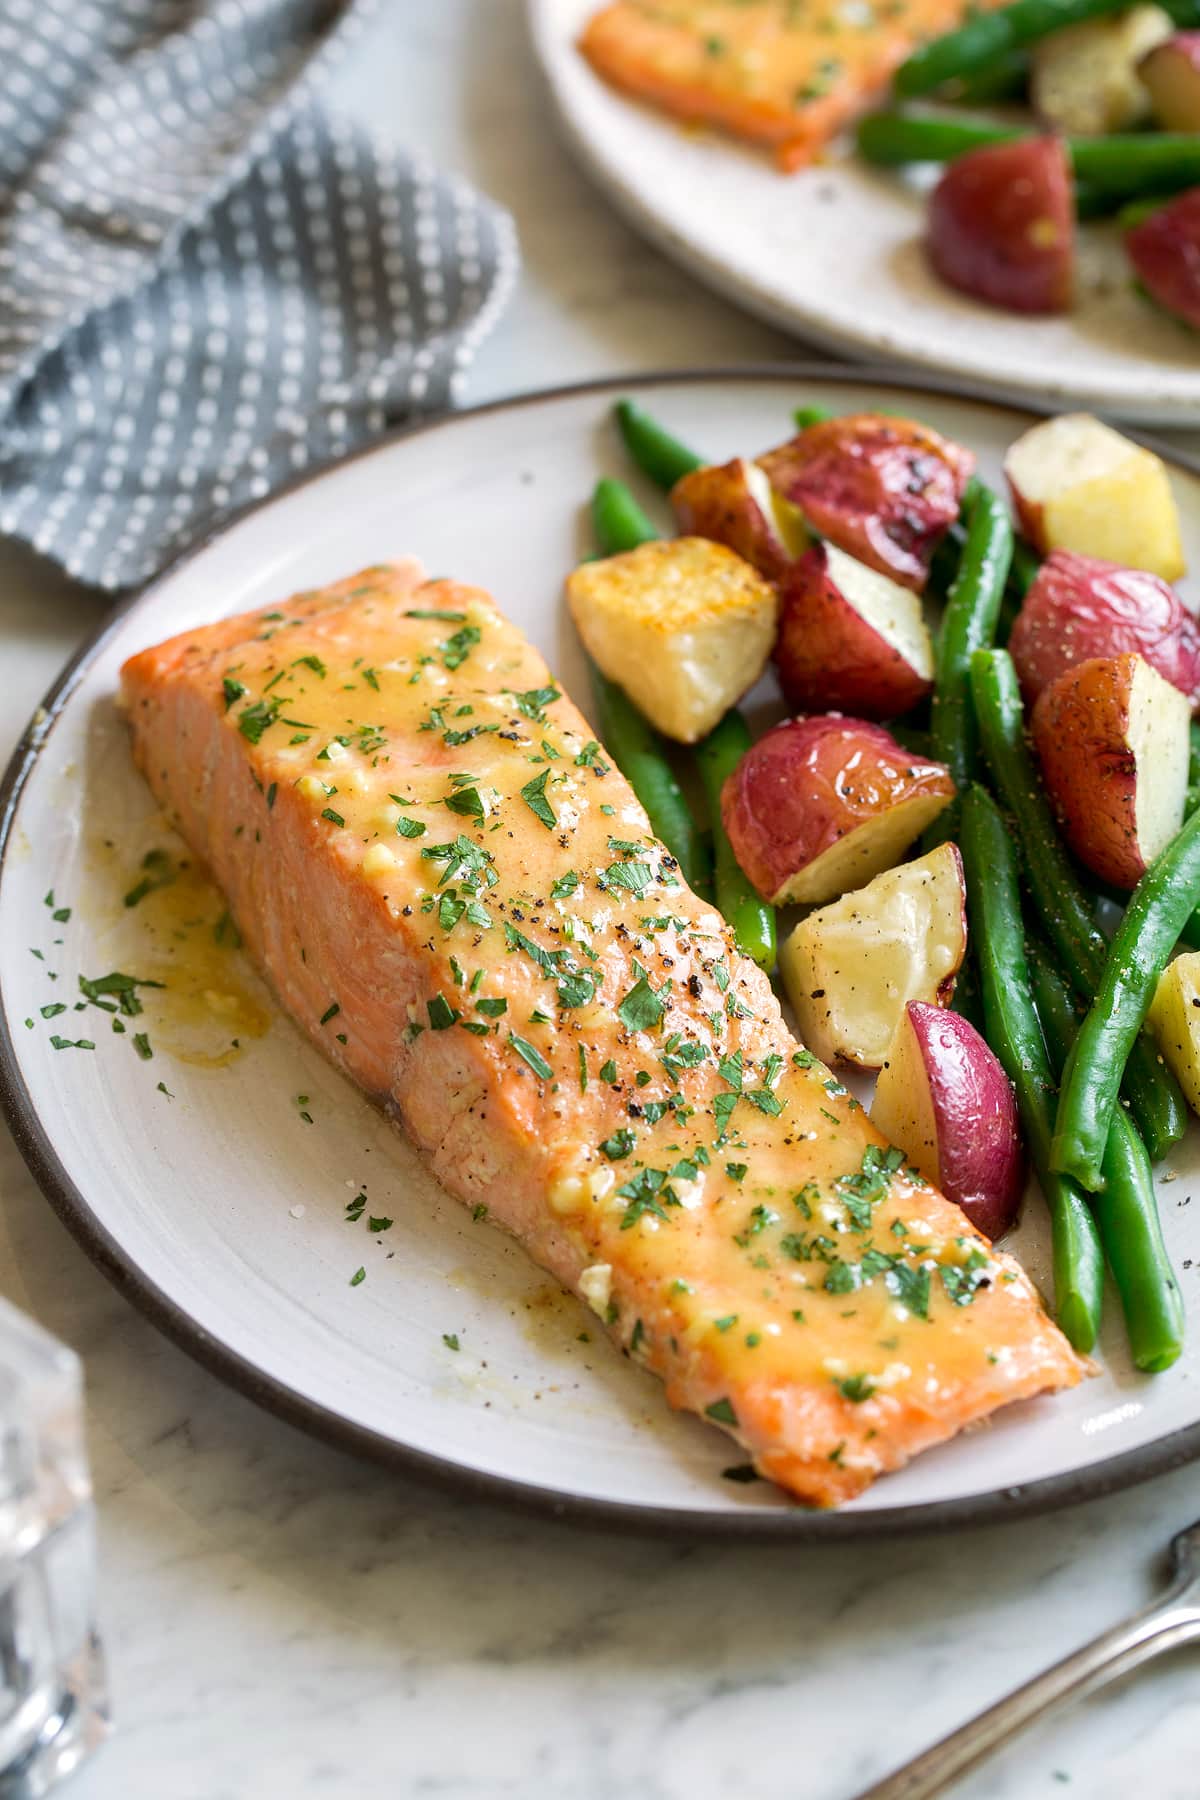 Single baked salmon fillet on a serving dish with a side of roasted potatoes and carrots. Salmon is brushed with a honey mustard sauce.